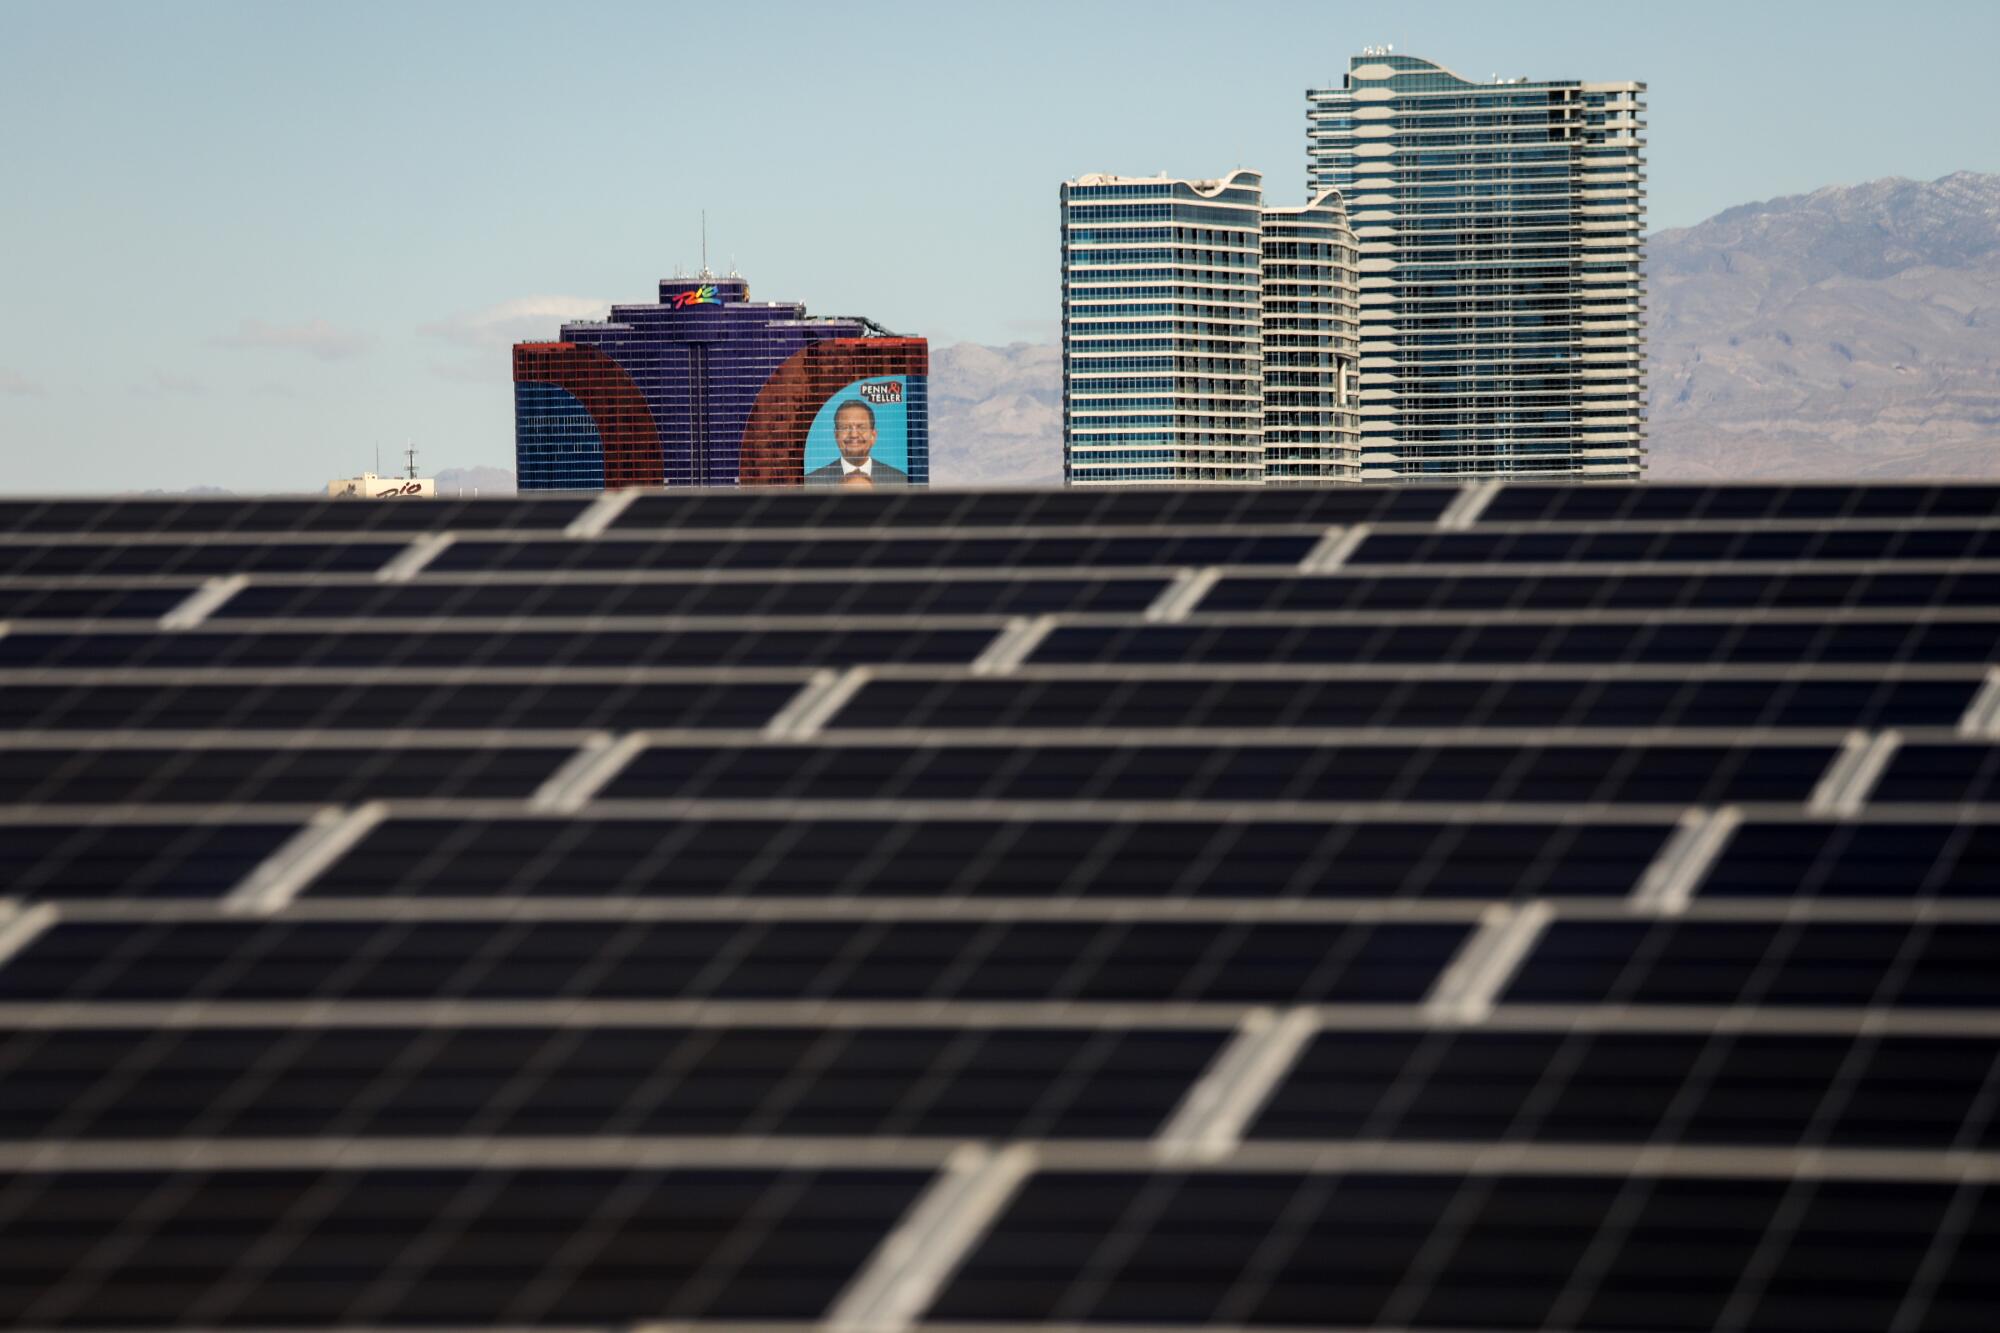 Solar panels on the roof of Mandalay Bay Convention Center, with Rio hotel and casino in the background.